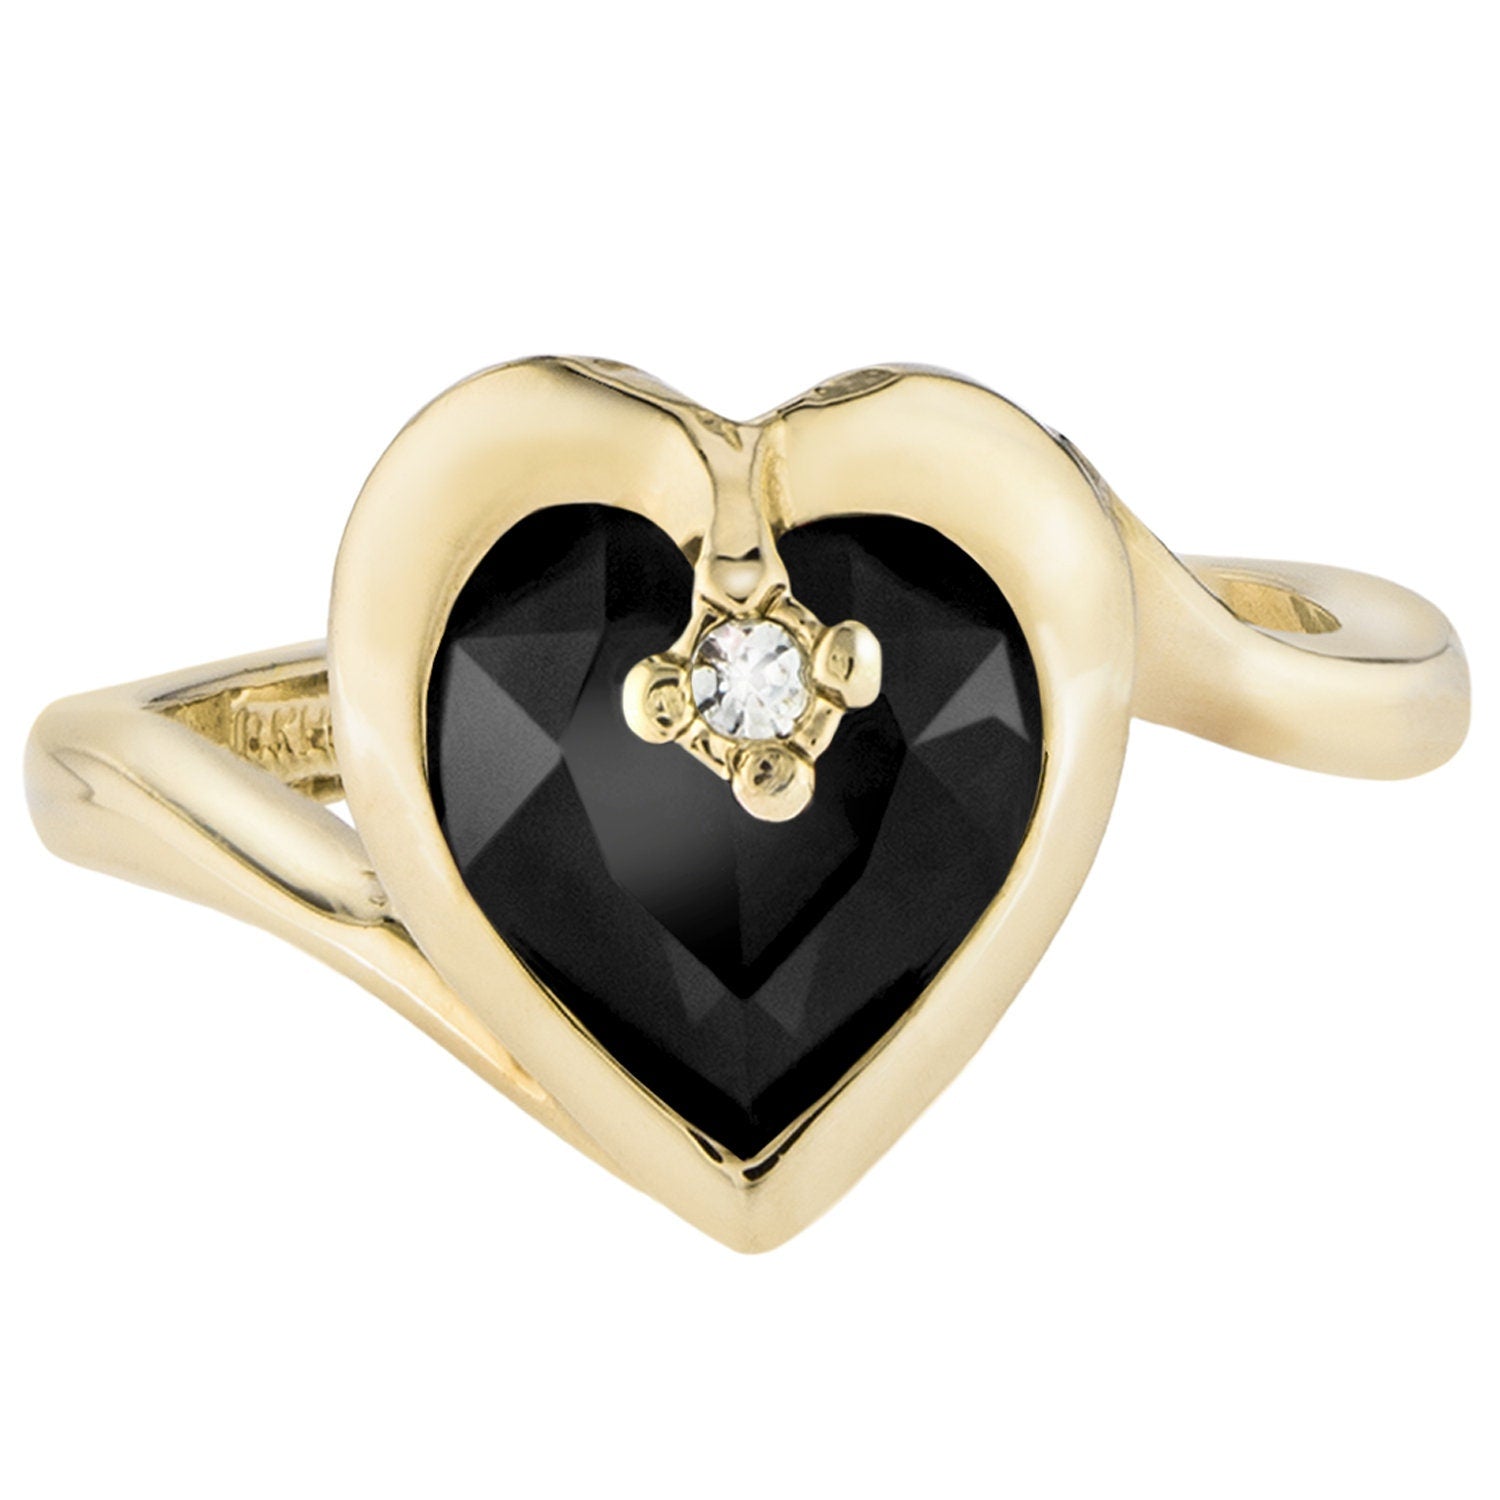 Vintage Ring 1970s Heart Shape Ring with Jet Black Swarovski Crystal 18k Gold Antique Womans Jewelry #R1400 - Limited Stock - Never Worn